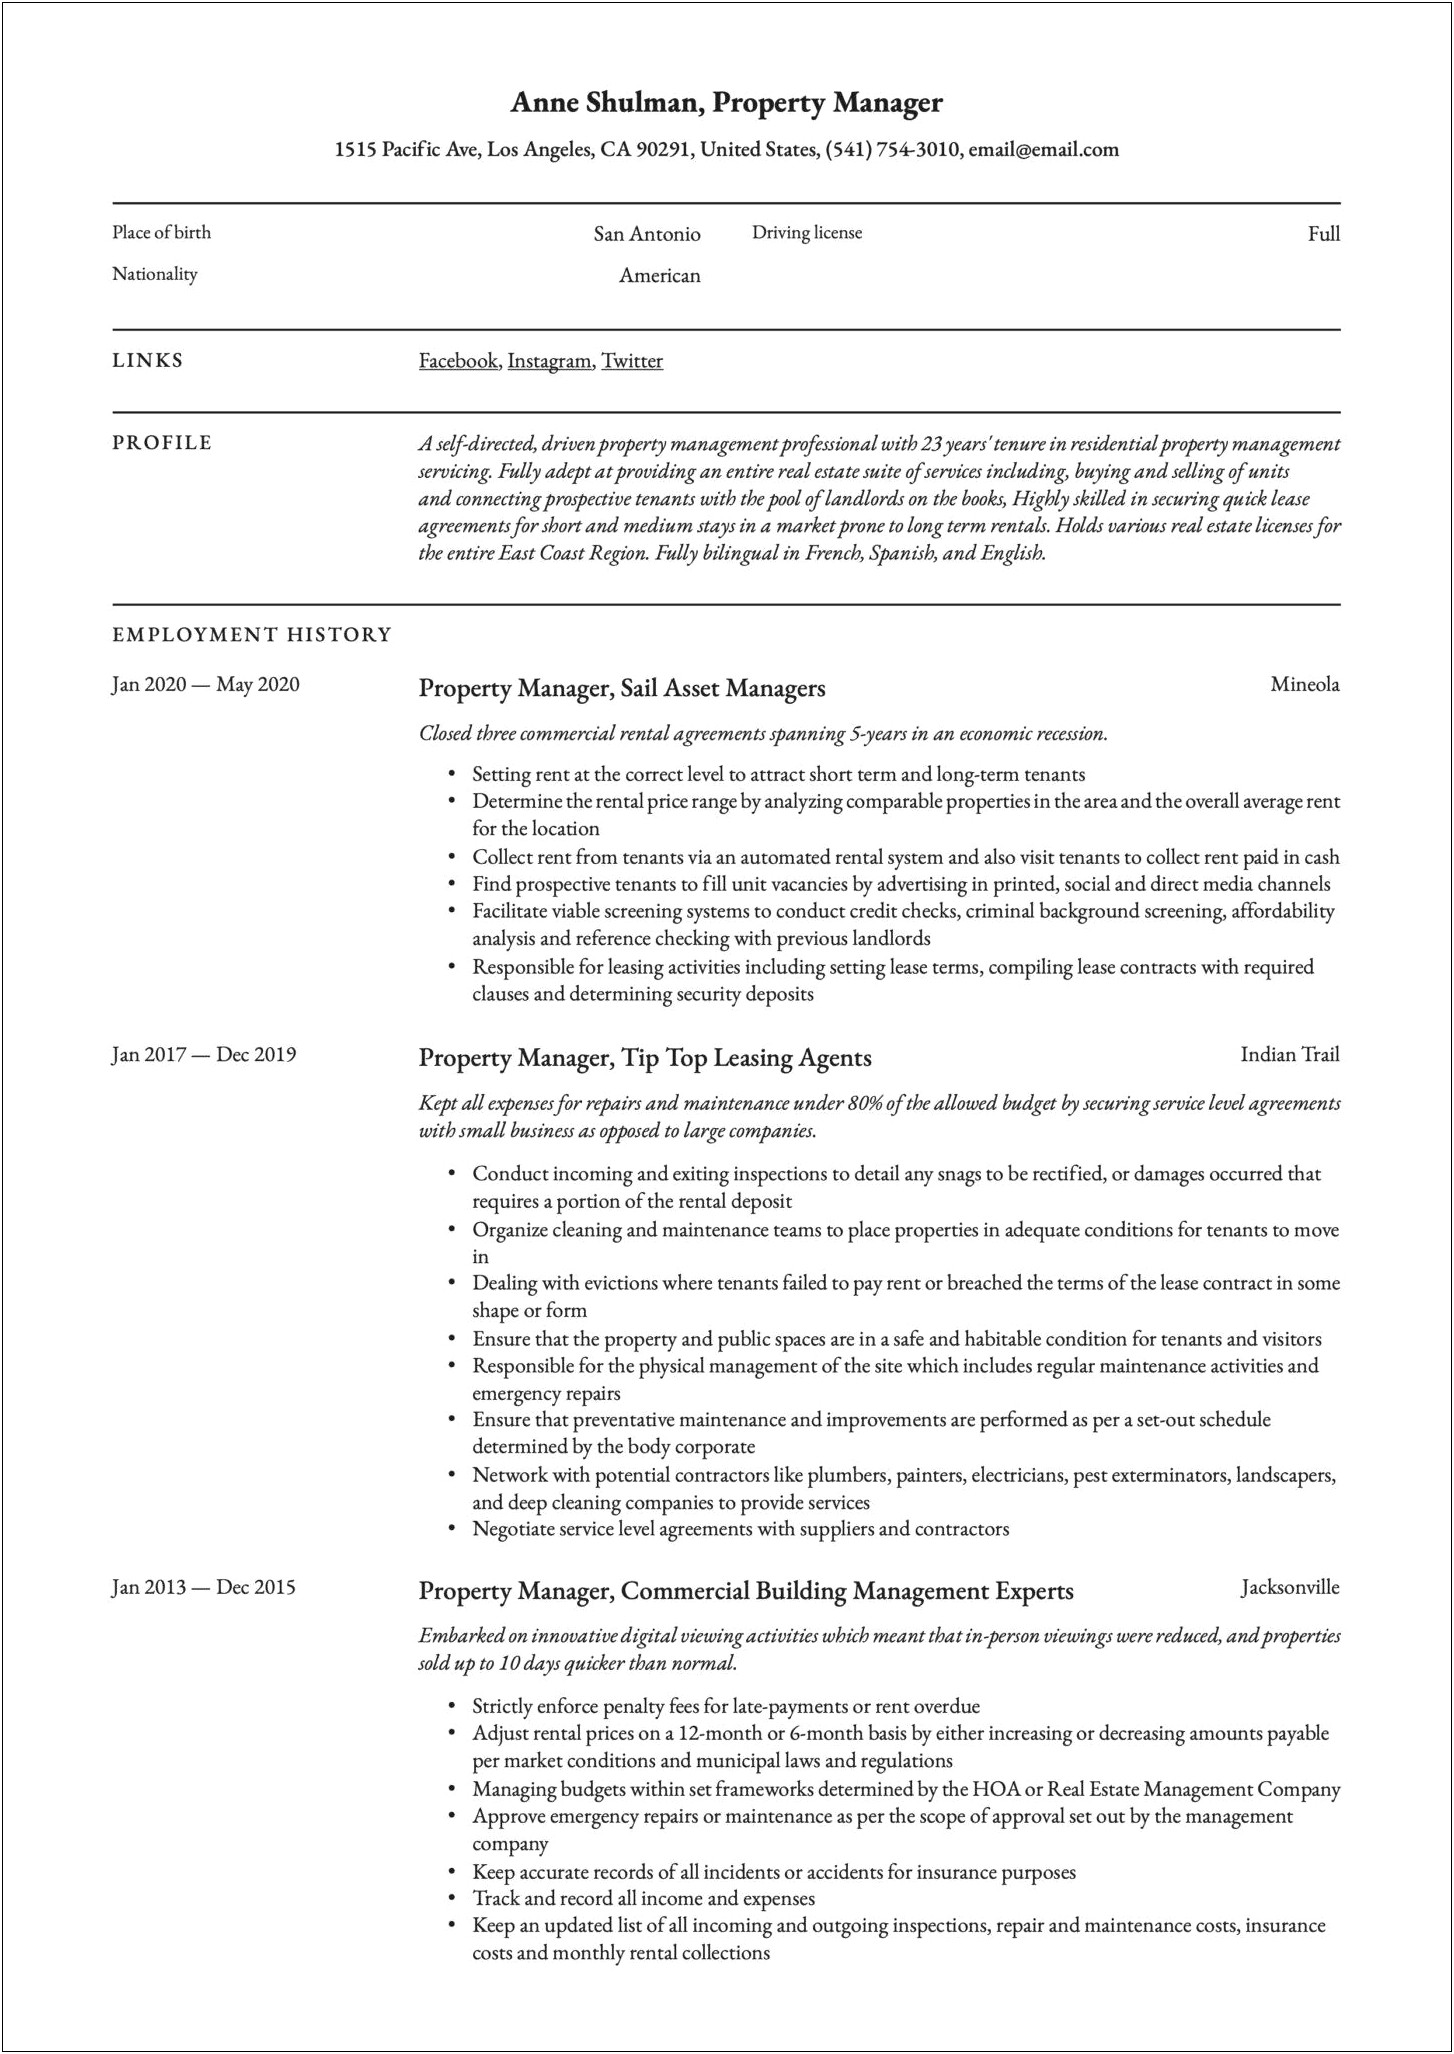 Credit And Collections Manager Resume Examples